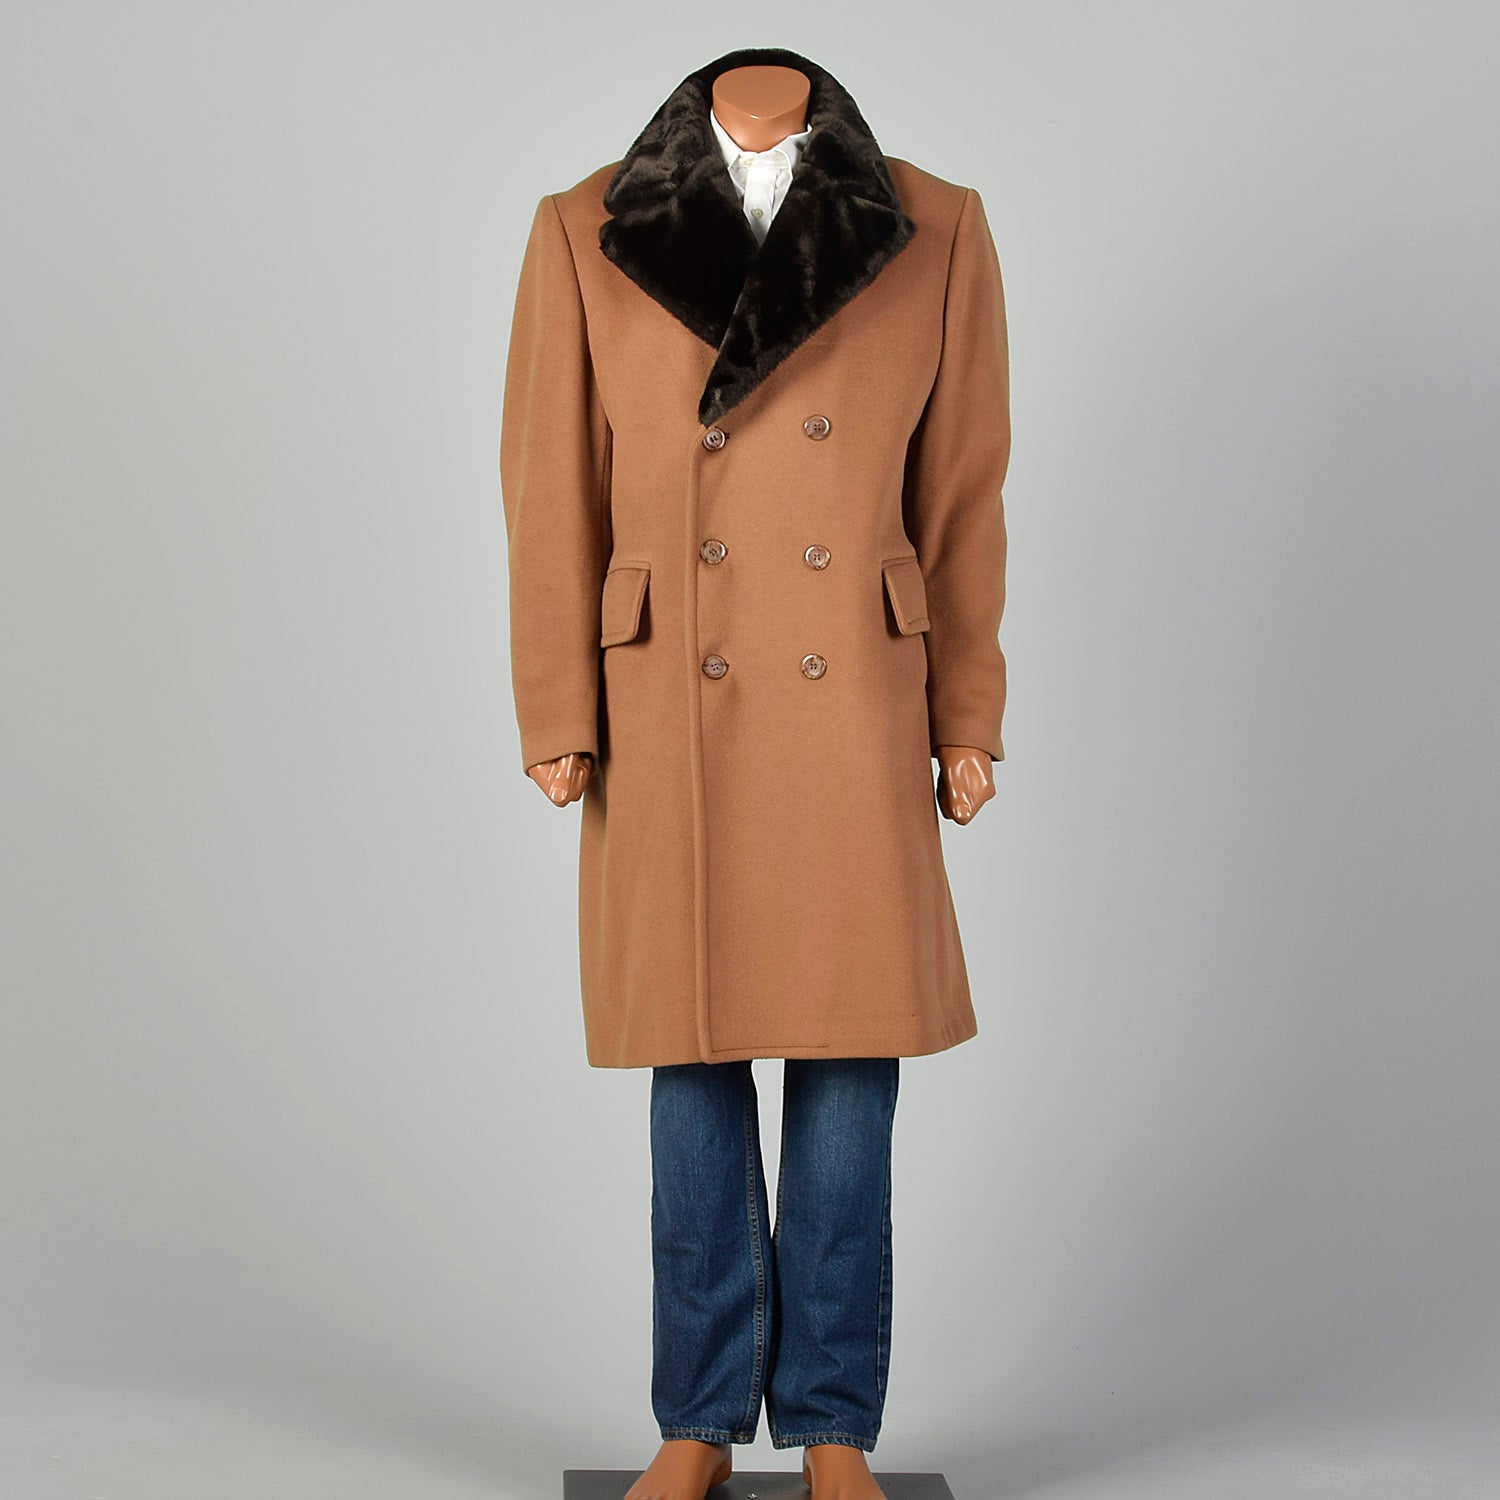 42 Large Men Tan Double Breasted Coat